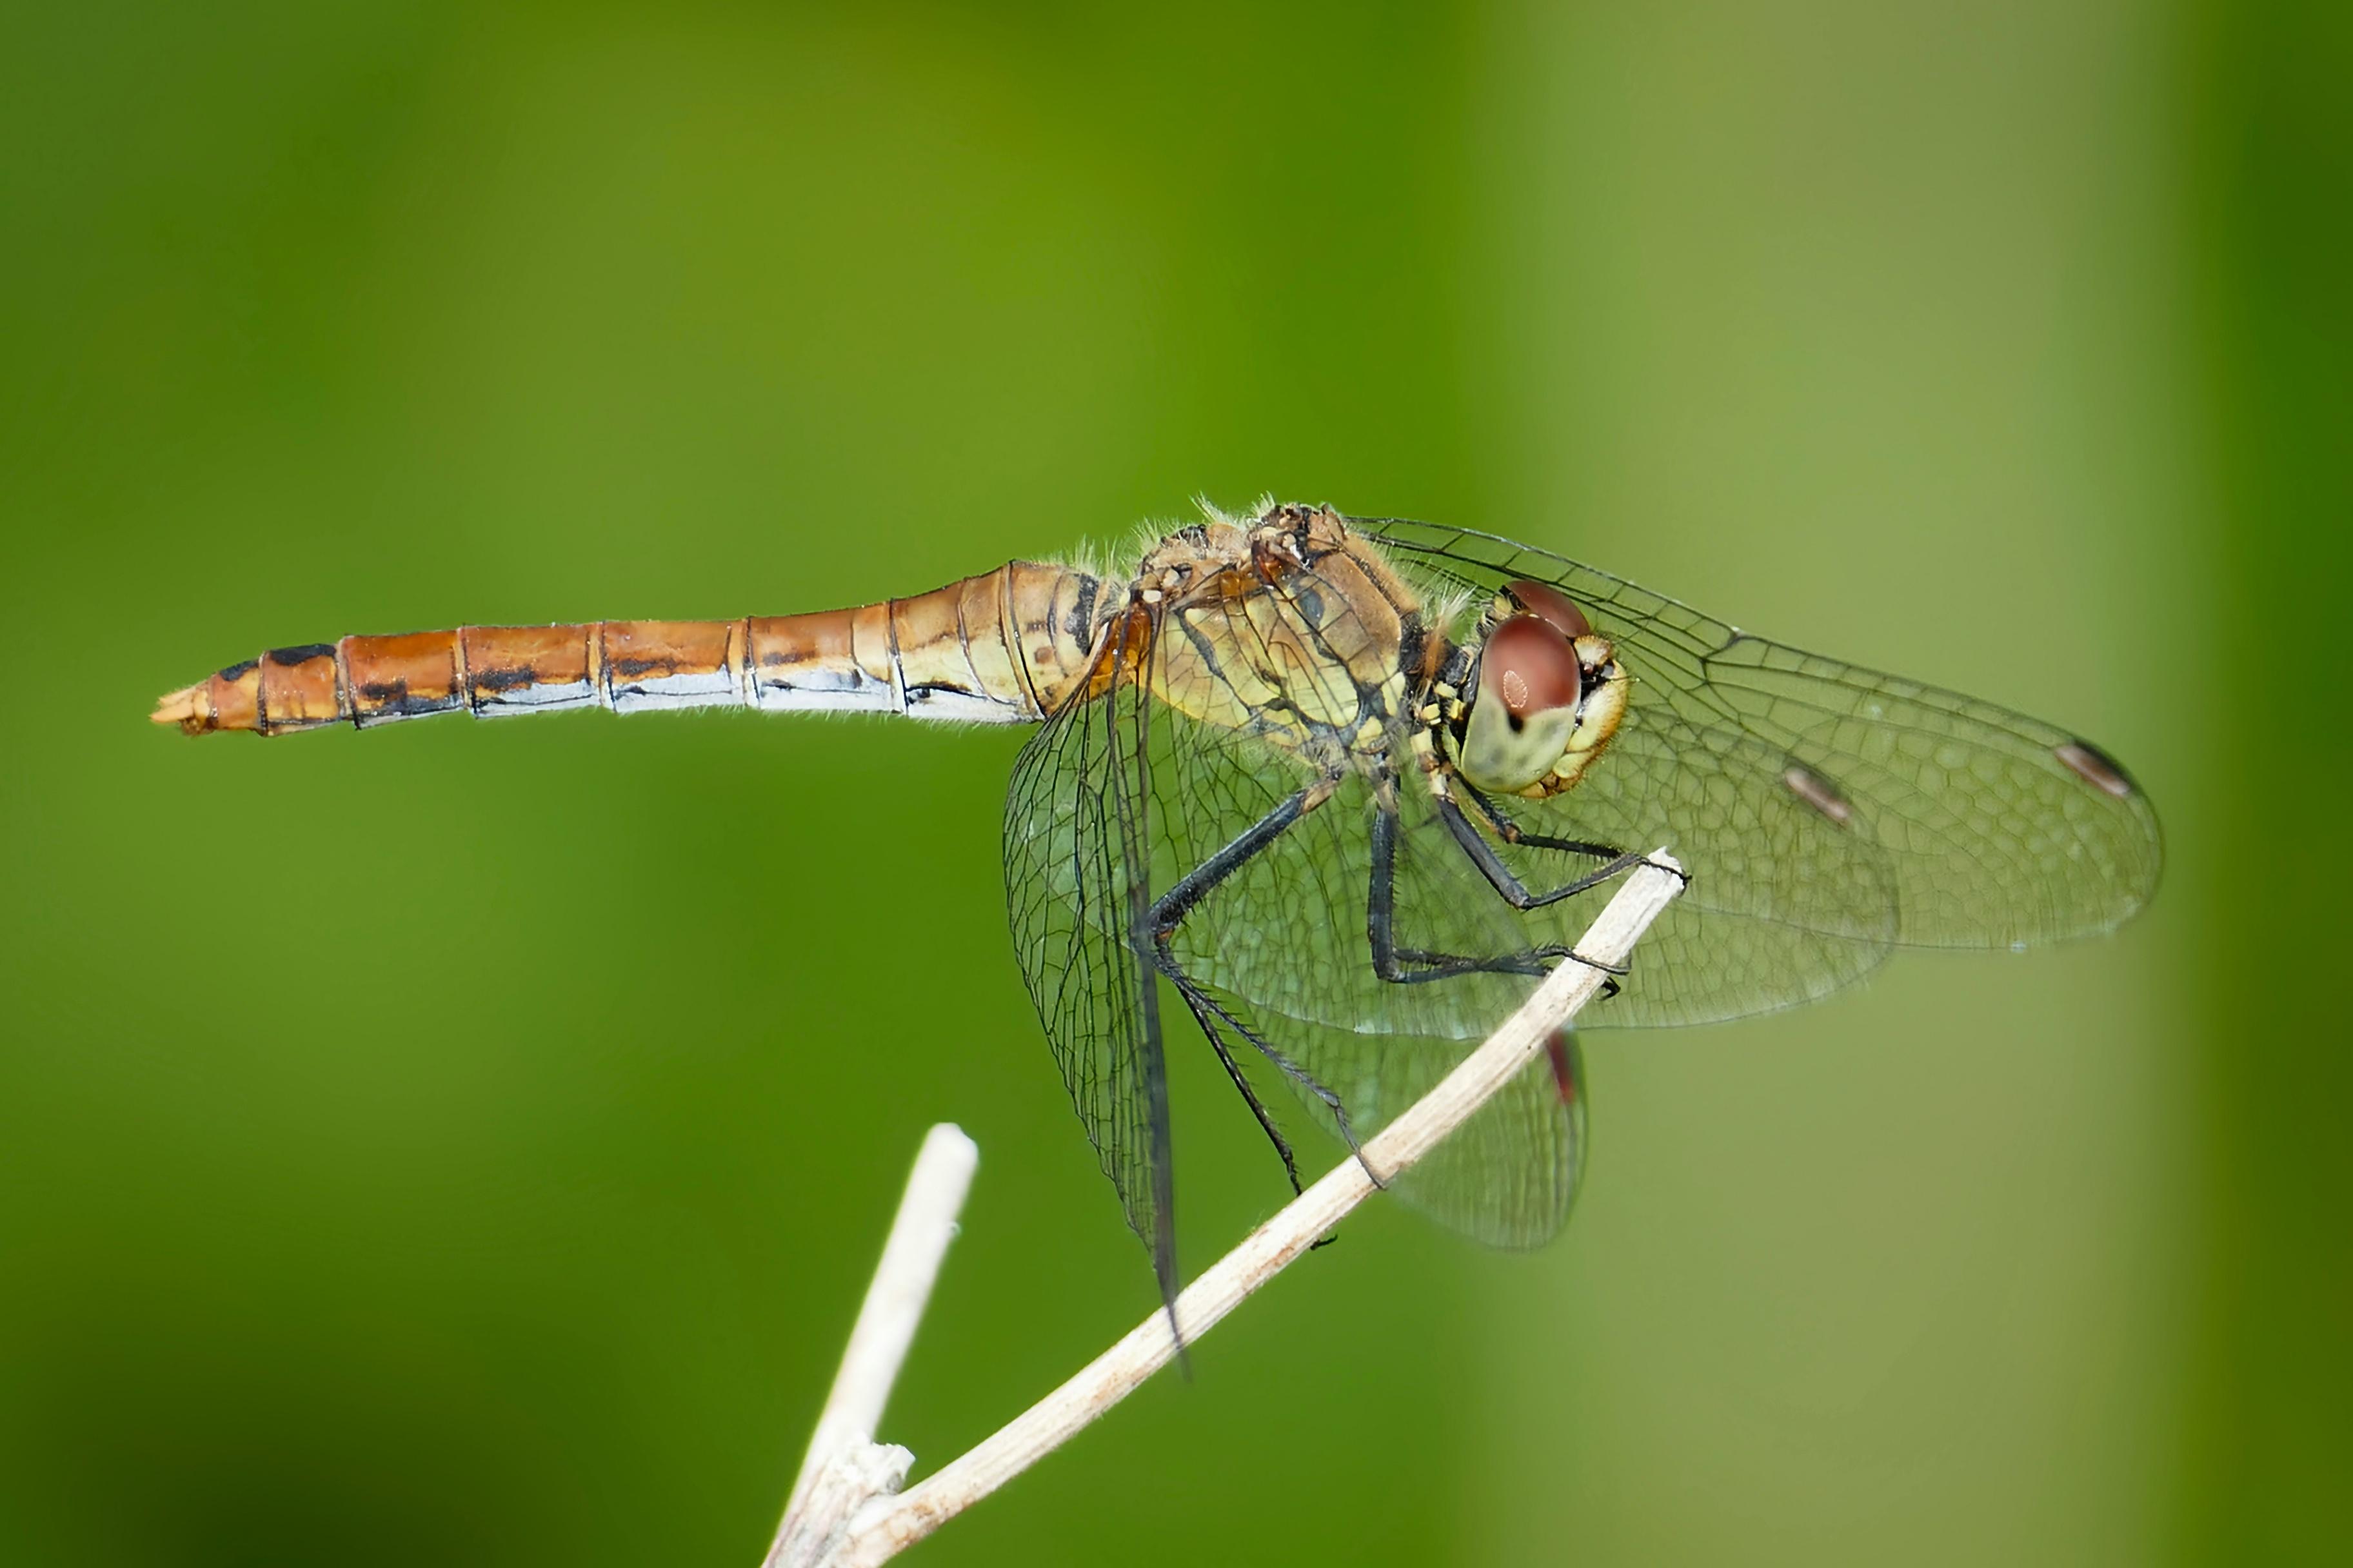 https://unsplash.com/photos/a-close-up-of-a-dragonfly-on-a-twig-G_UifBZk8O8